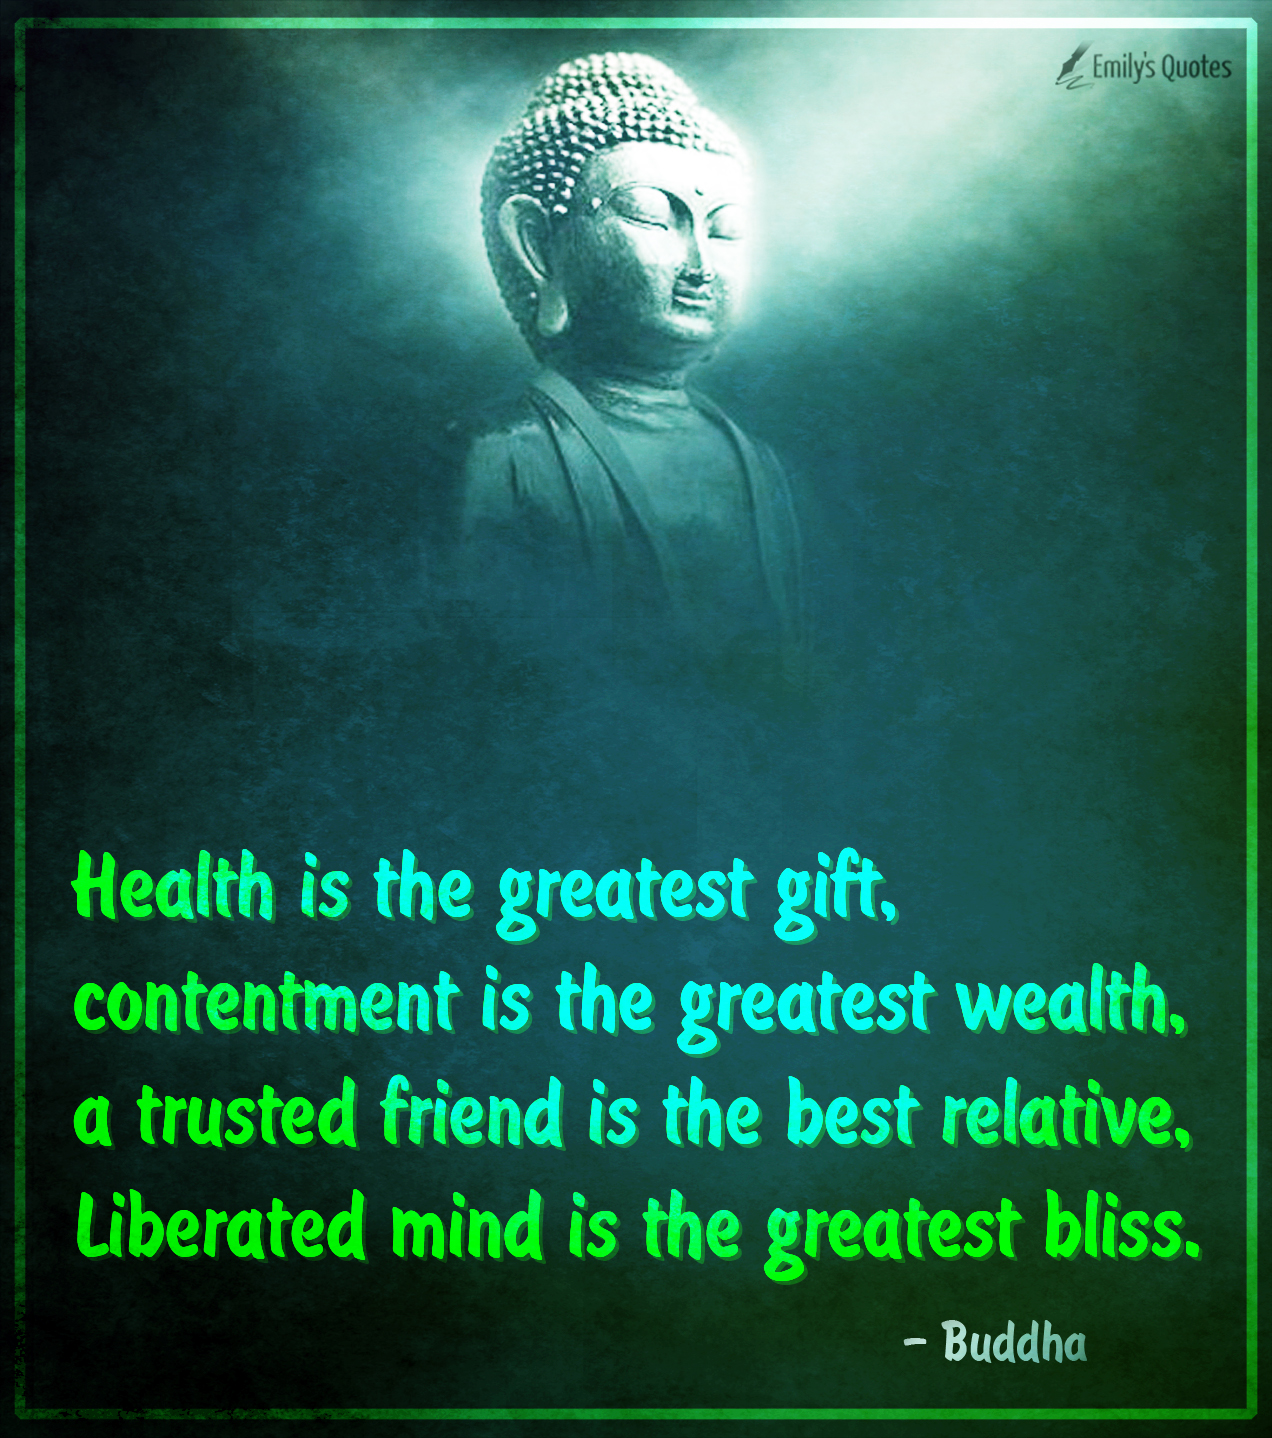 Health is the greatest gift, contentment is the greatest wealth